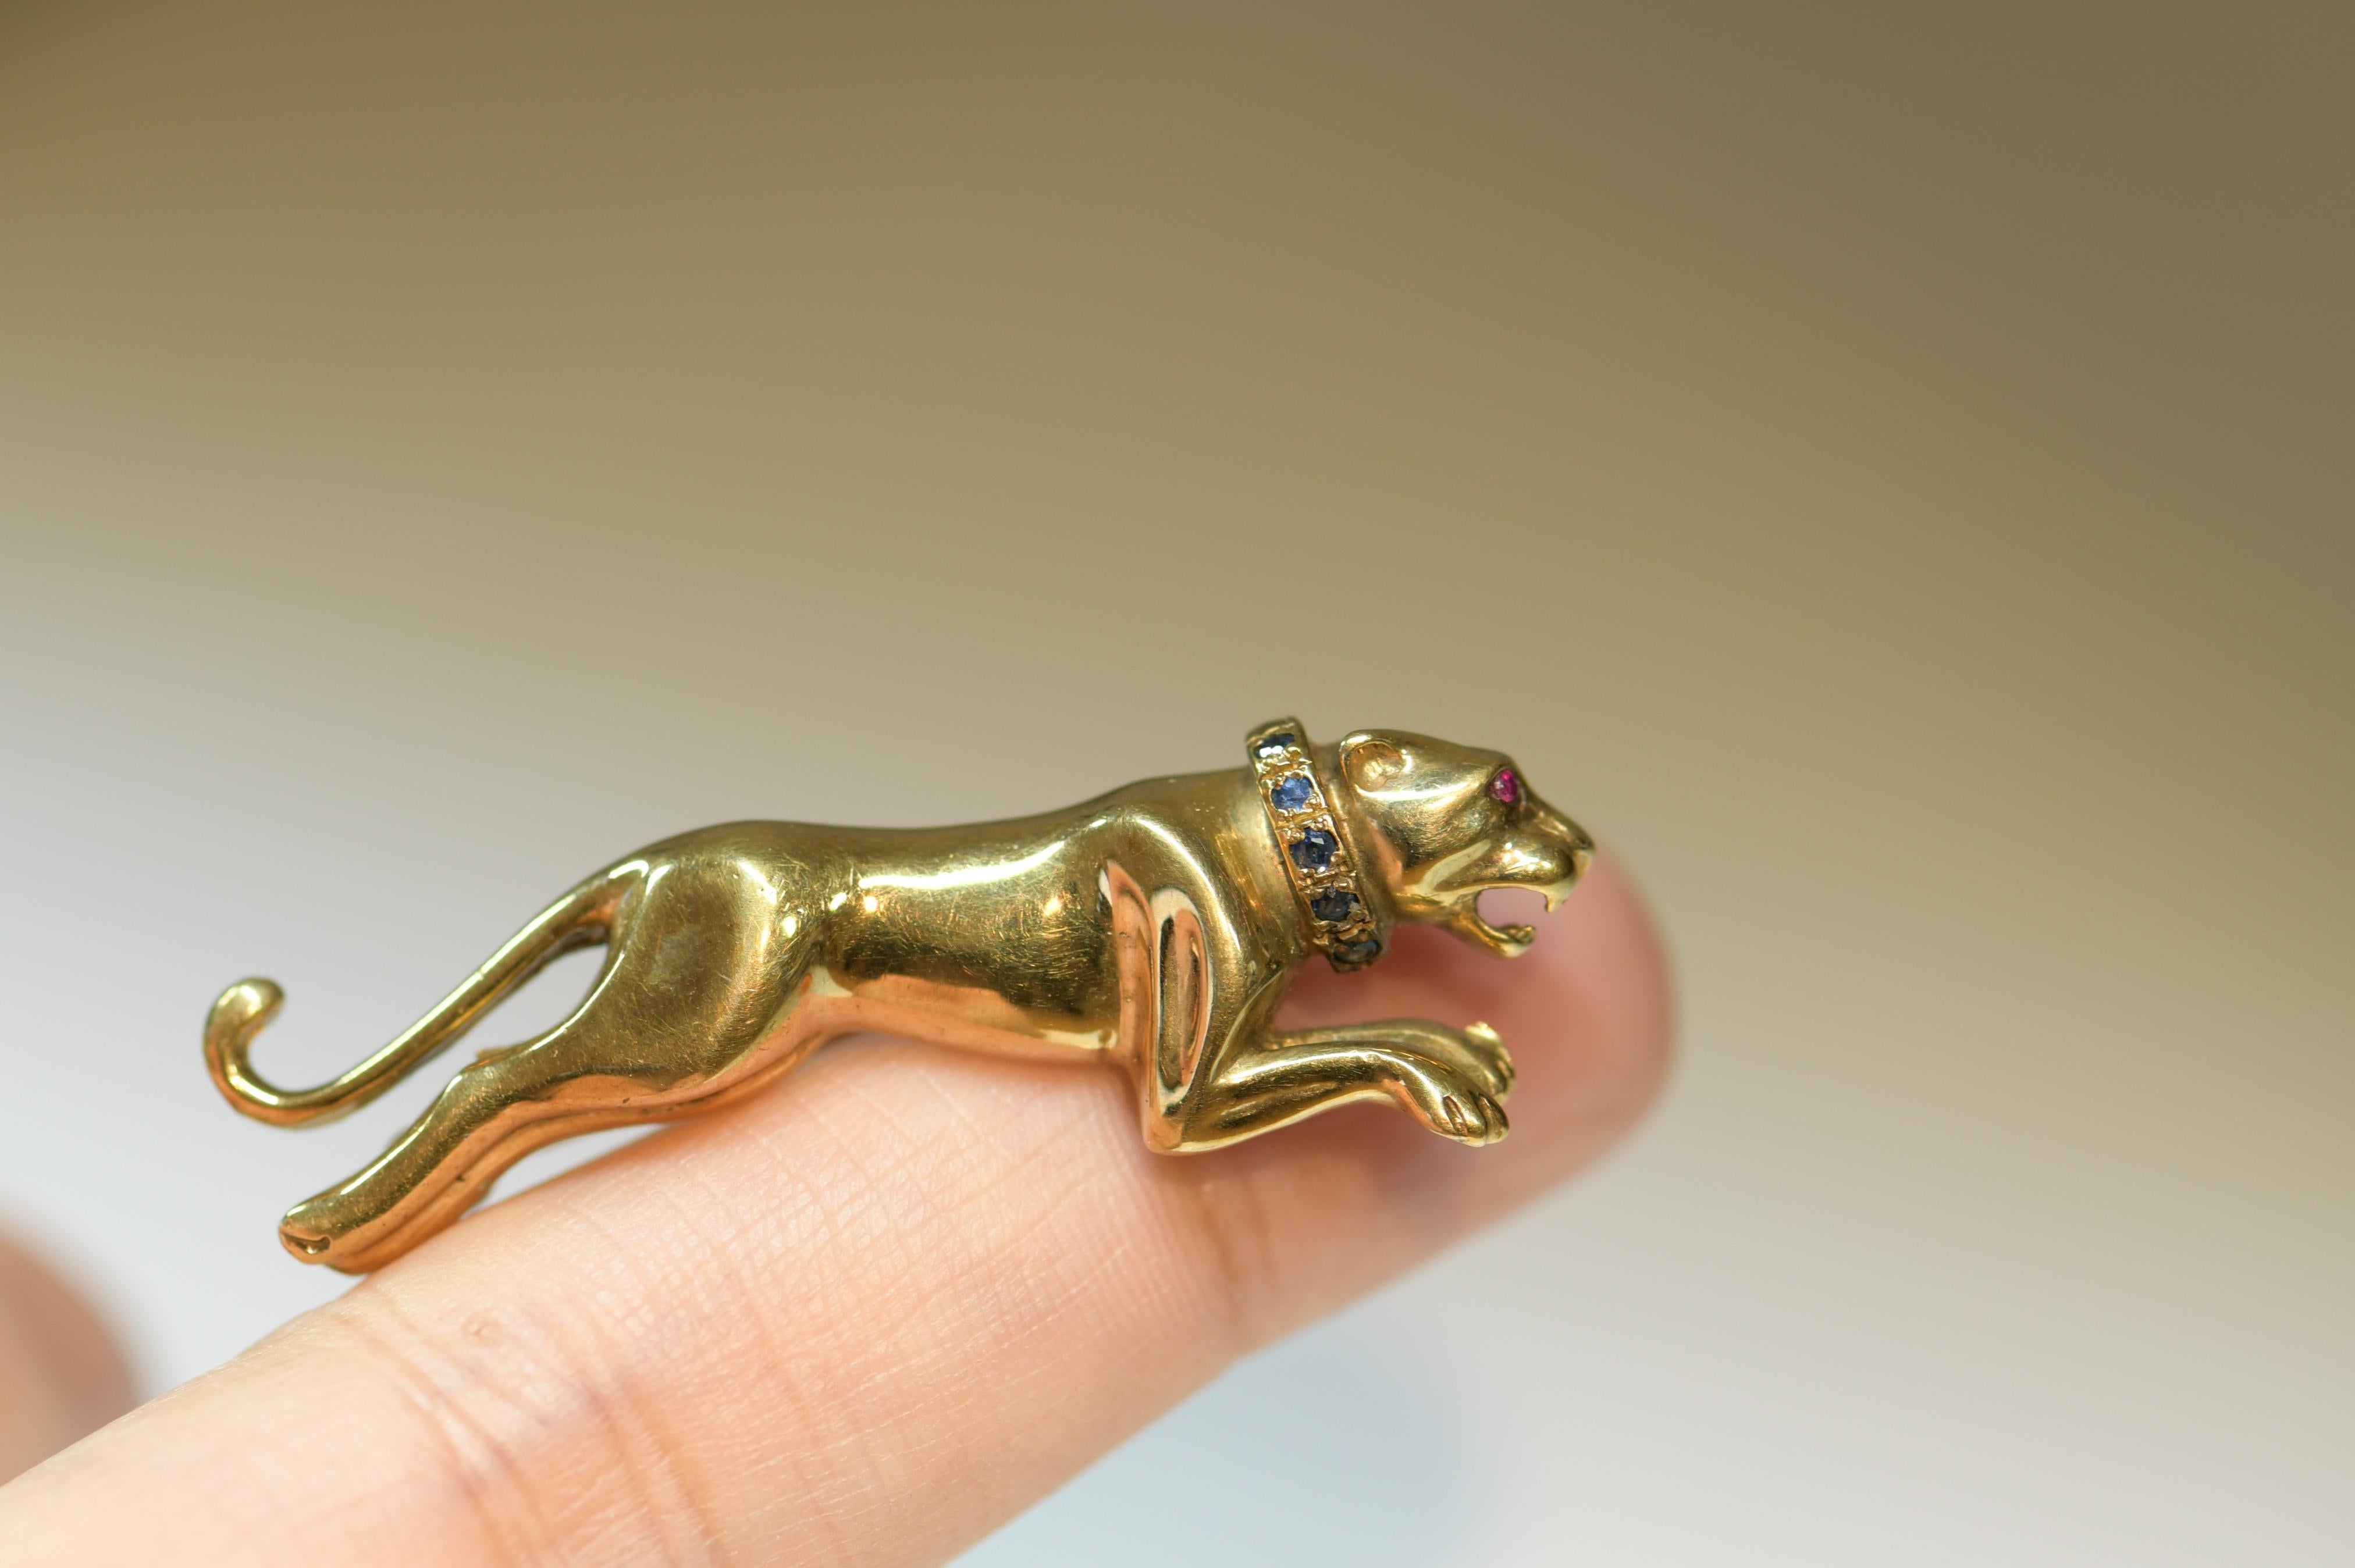 The brooch depicts a running panther and is set with two round-cut ruby eyes. This piece really shows excellent craftsmanship. This stylish vintage brooch would look fabulous on a vintage or modern outfit! Circa